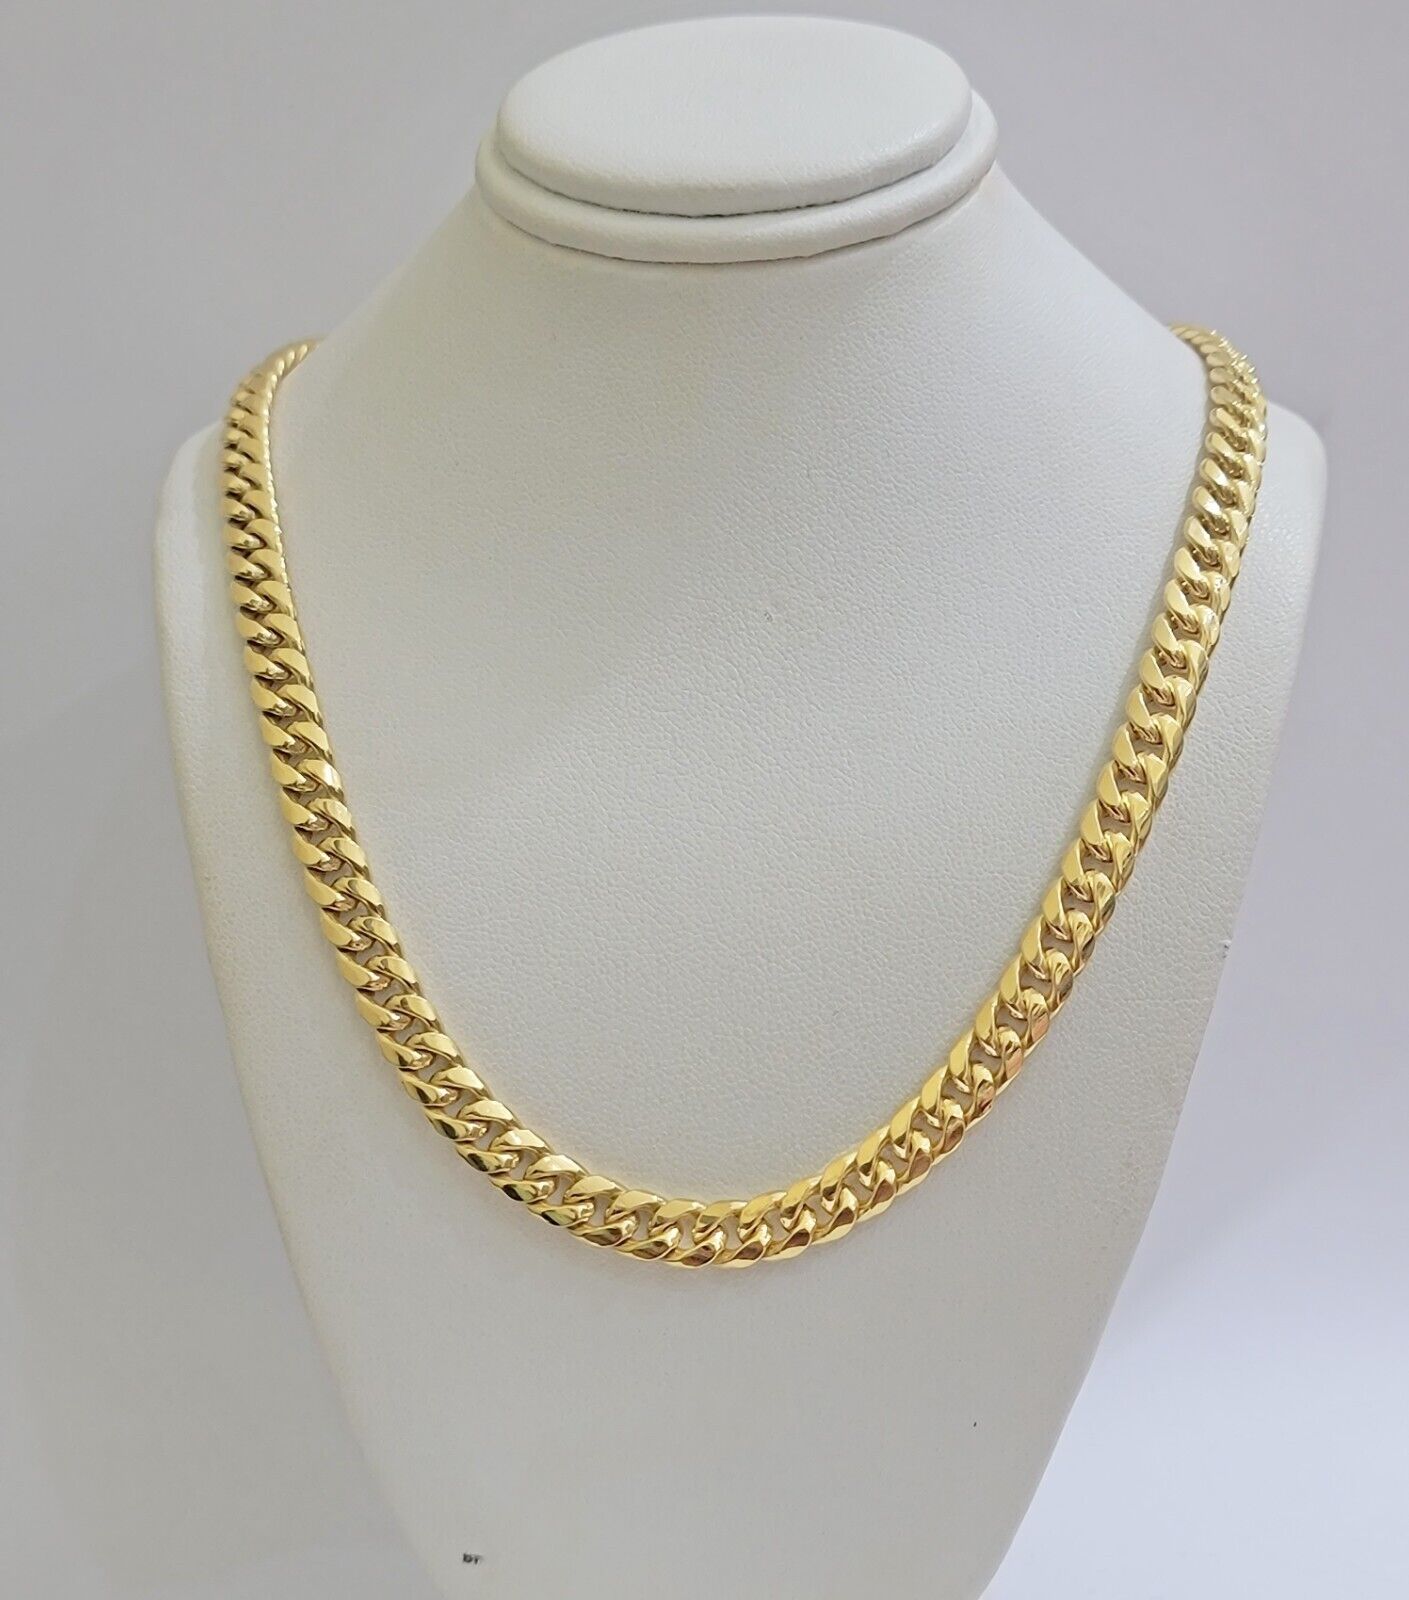 10k Gold Necklace 7mm 24 Inch Miami Cuban Link Chain REAL 10kt yellow Gold Men's